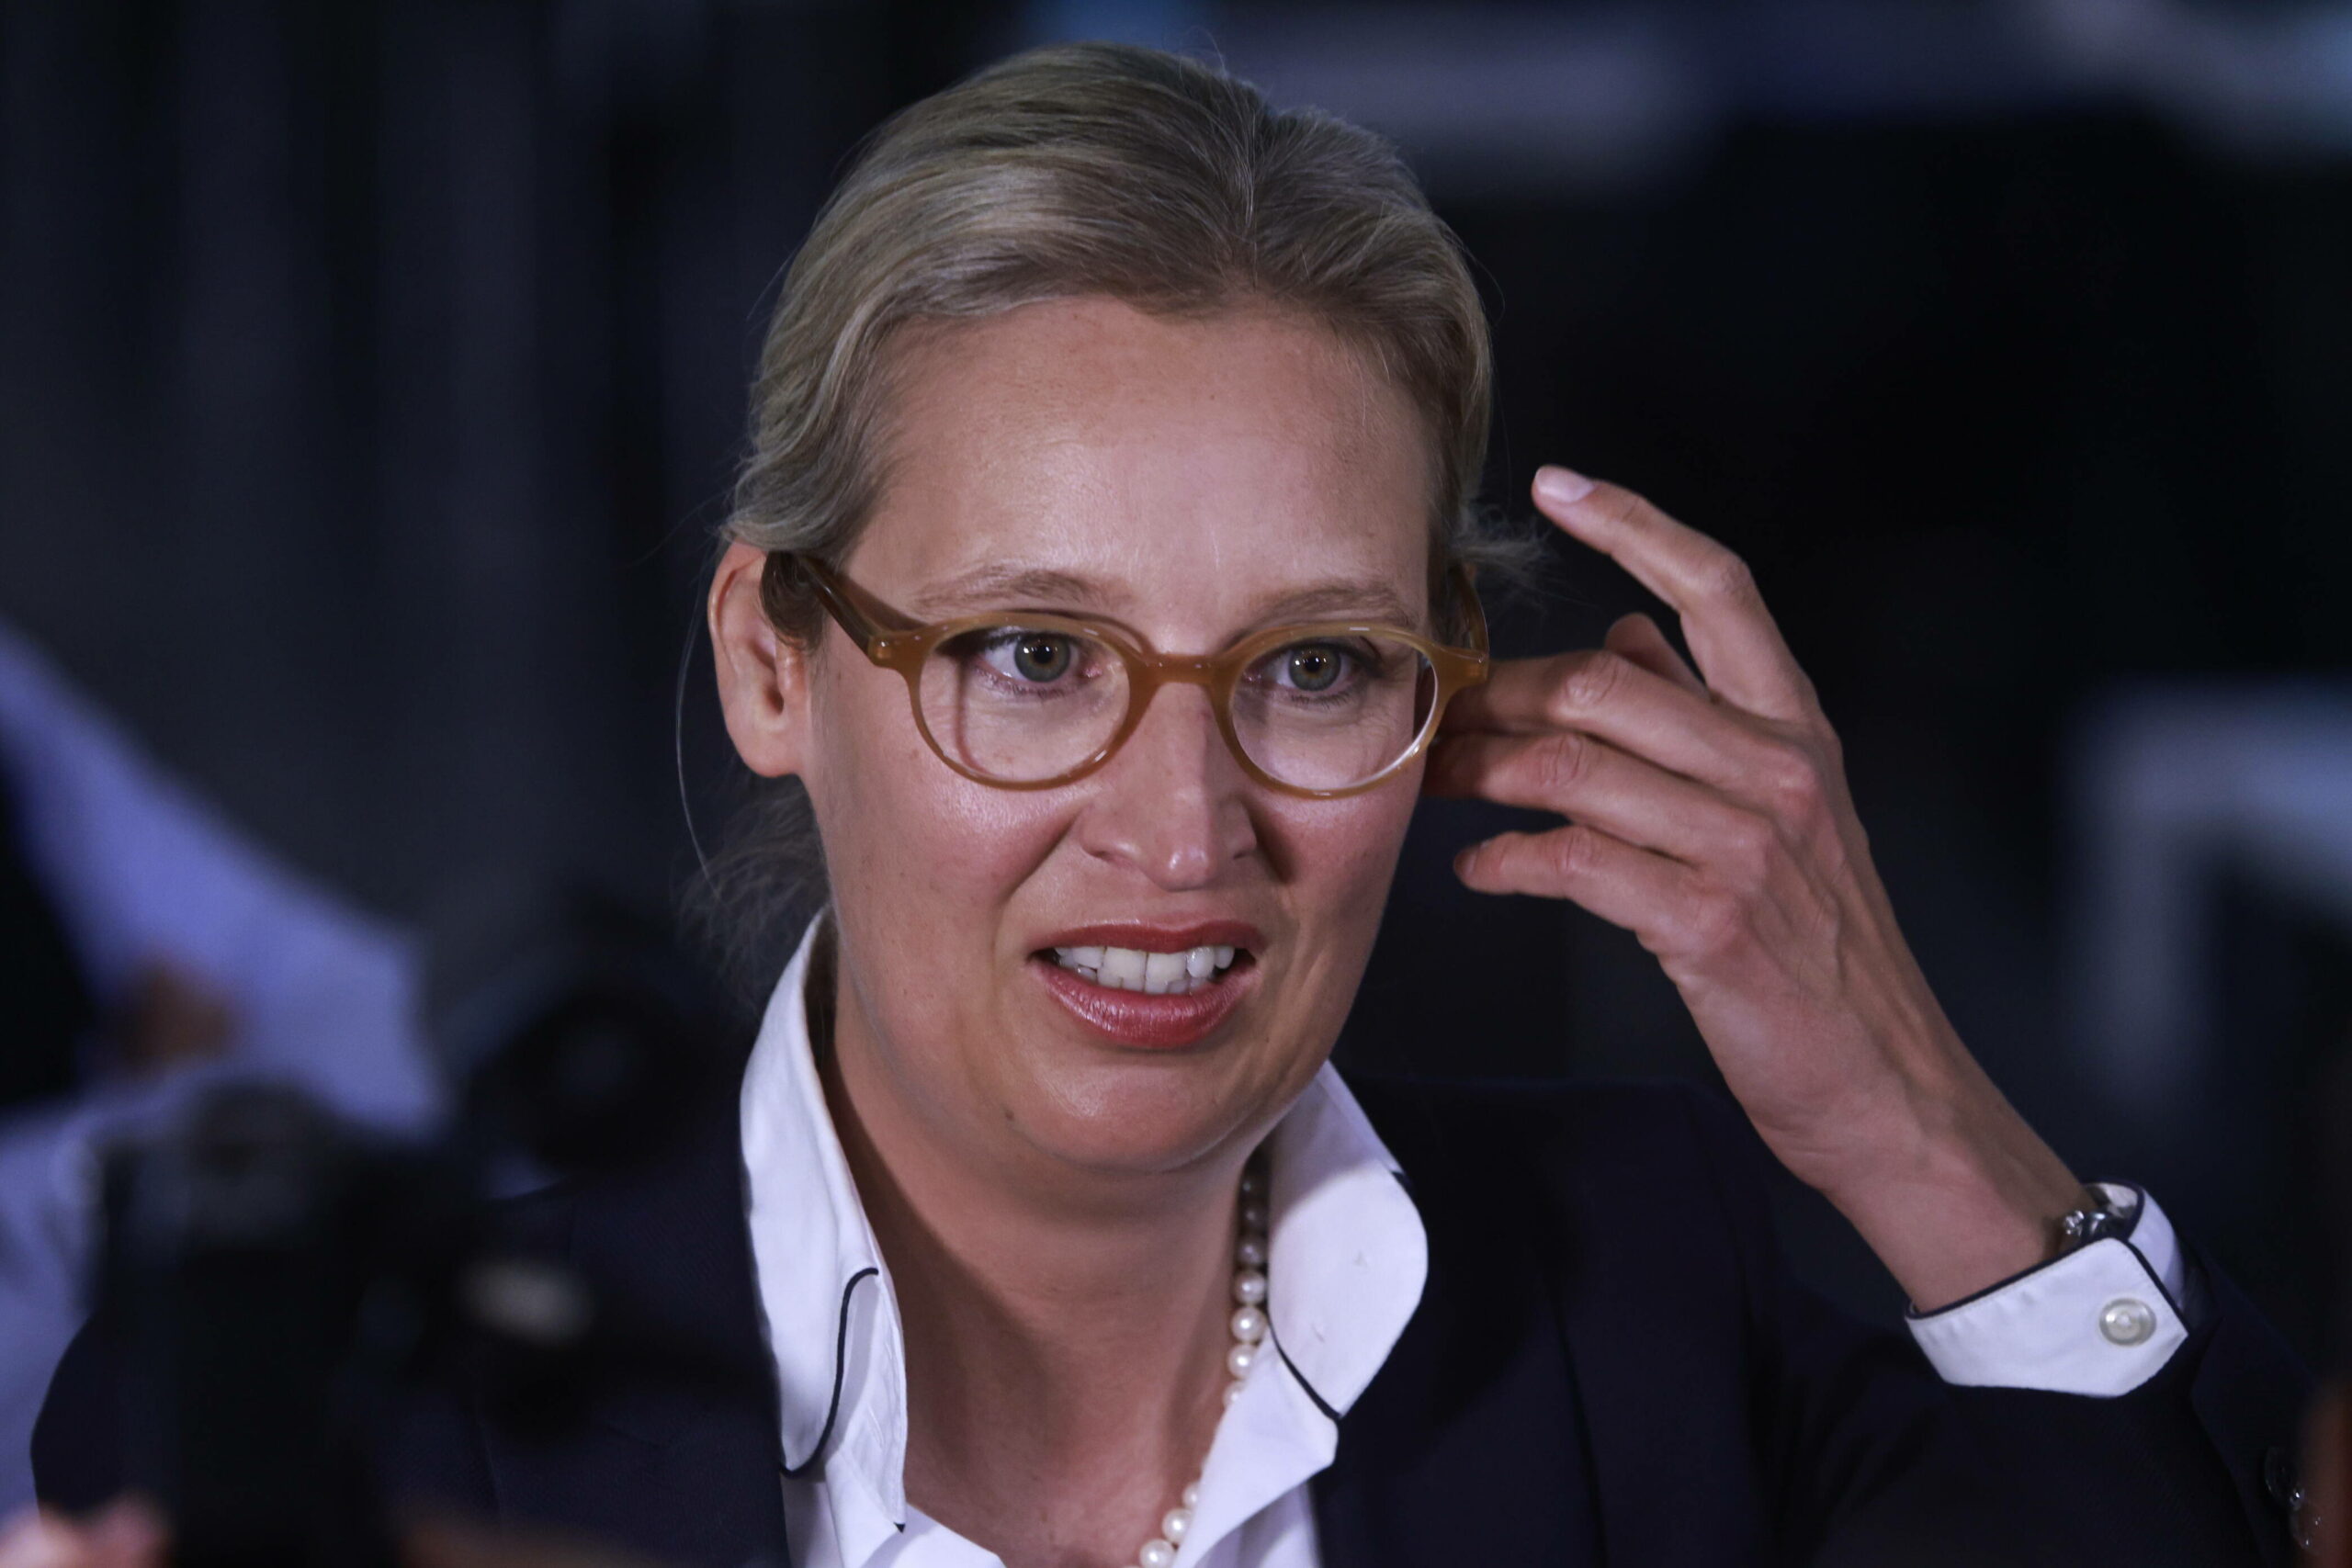 Alice weidel nackt fake - 🧡 As I mentioned before, exposure to true inform...